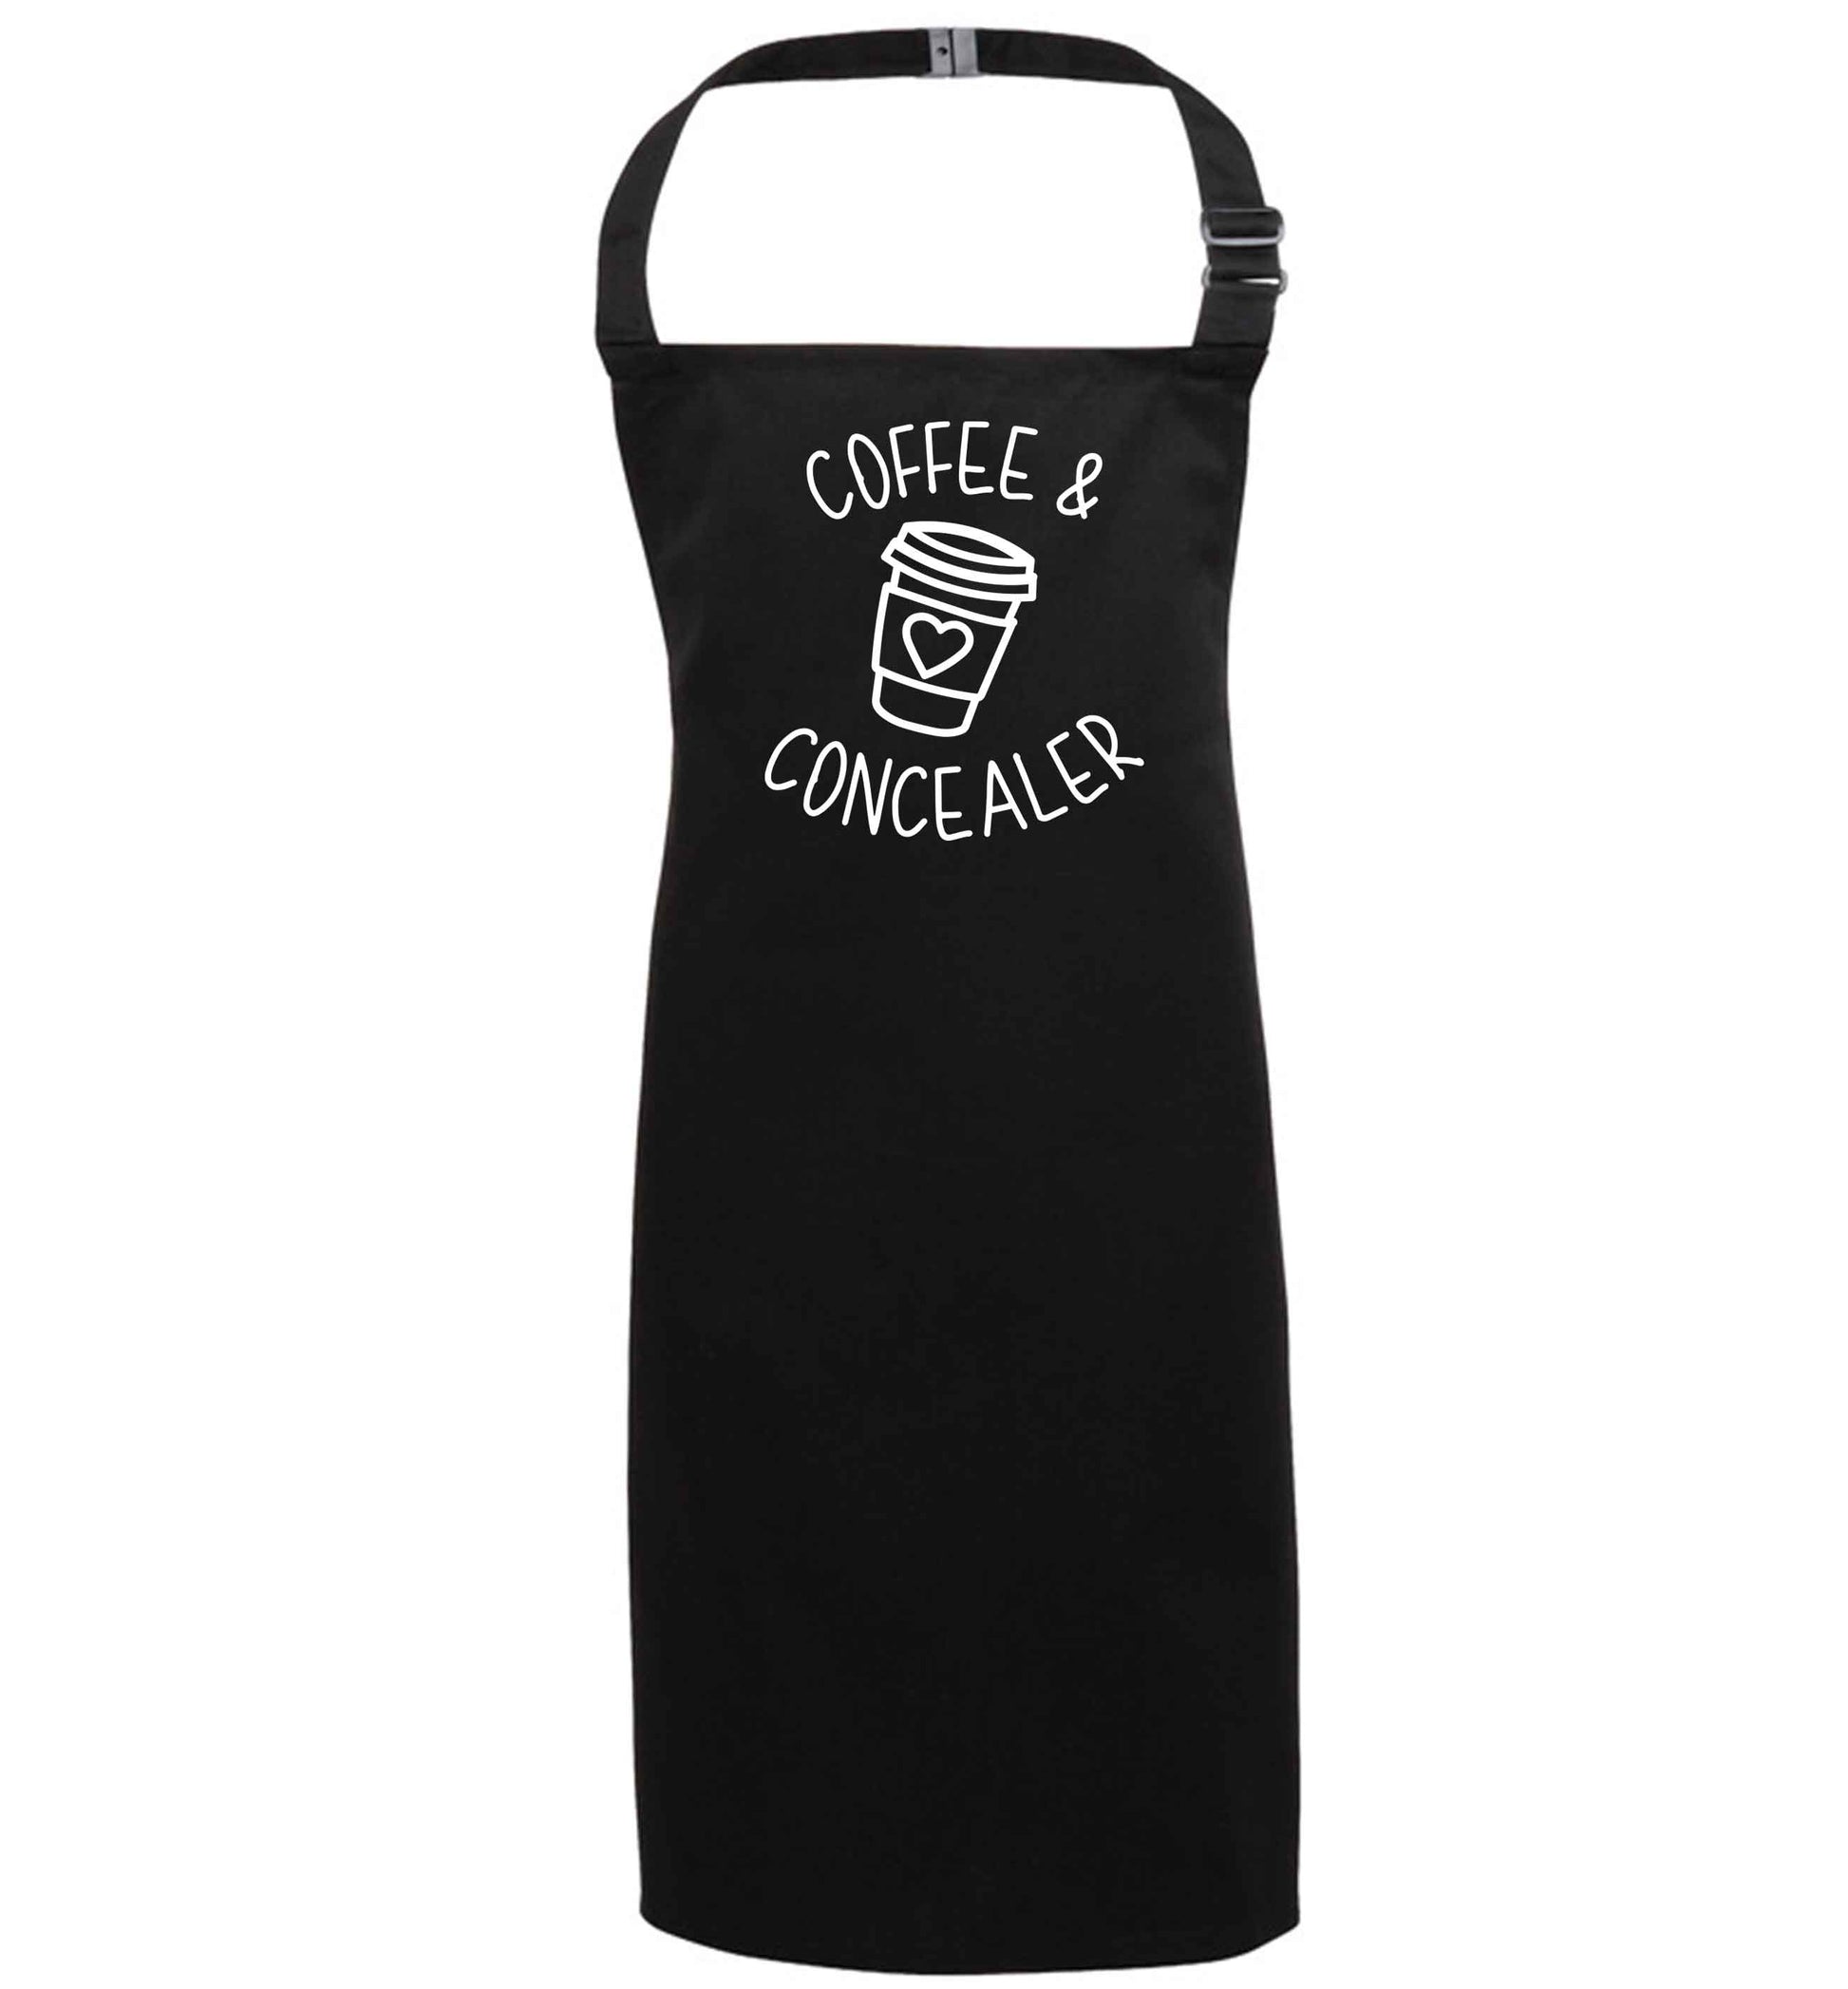 Coffee and concealer black apron 7-10 years